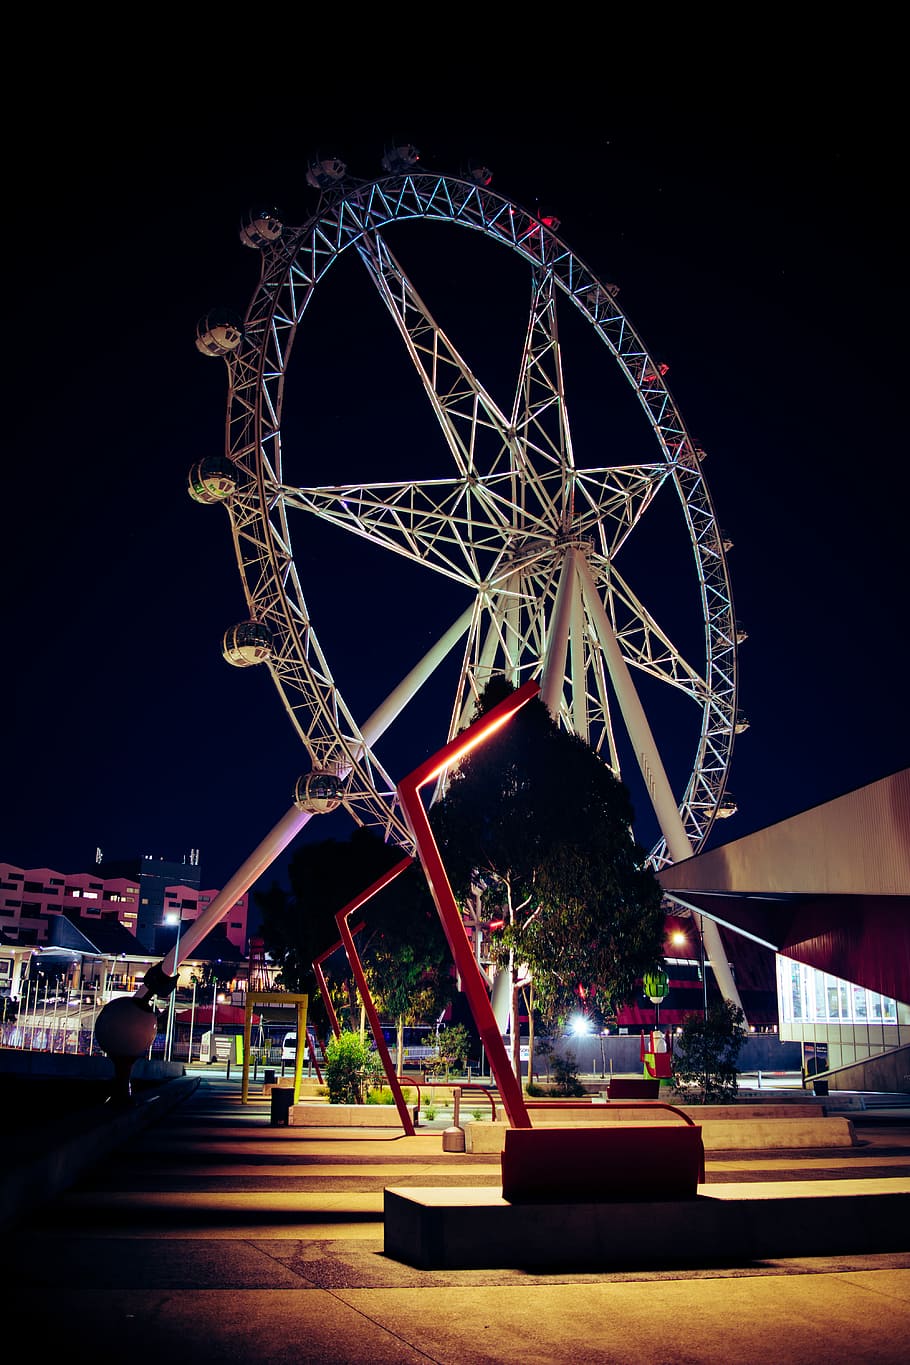 low angle photo of white and red ferris wheel, photo of white ferris wheel during night time